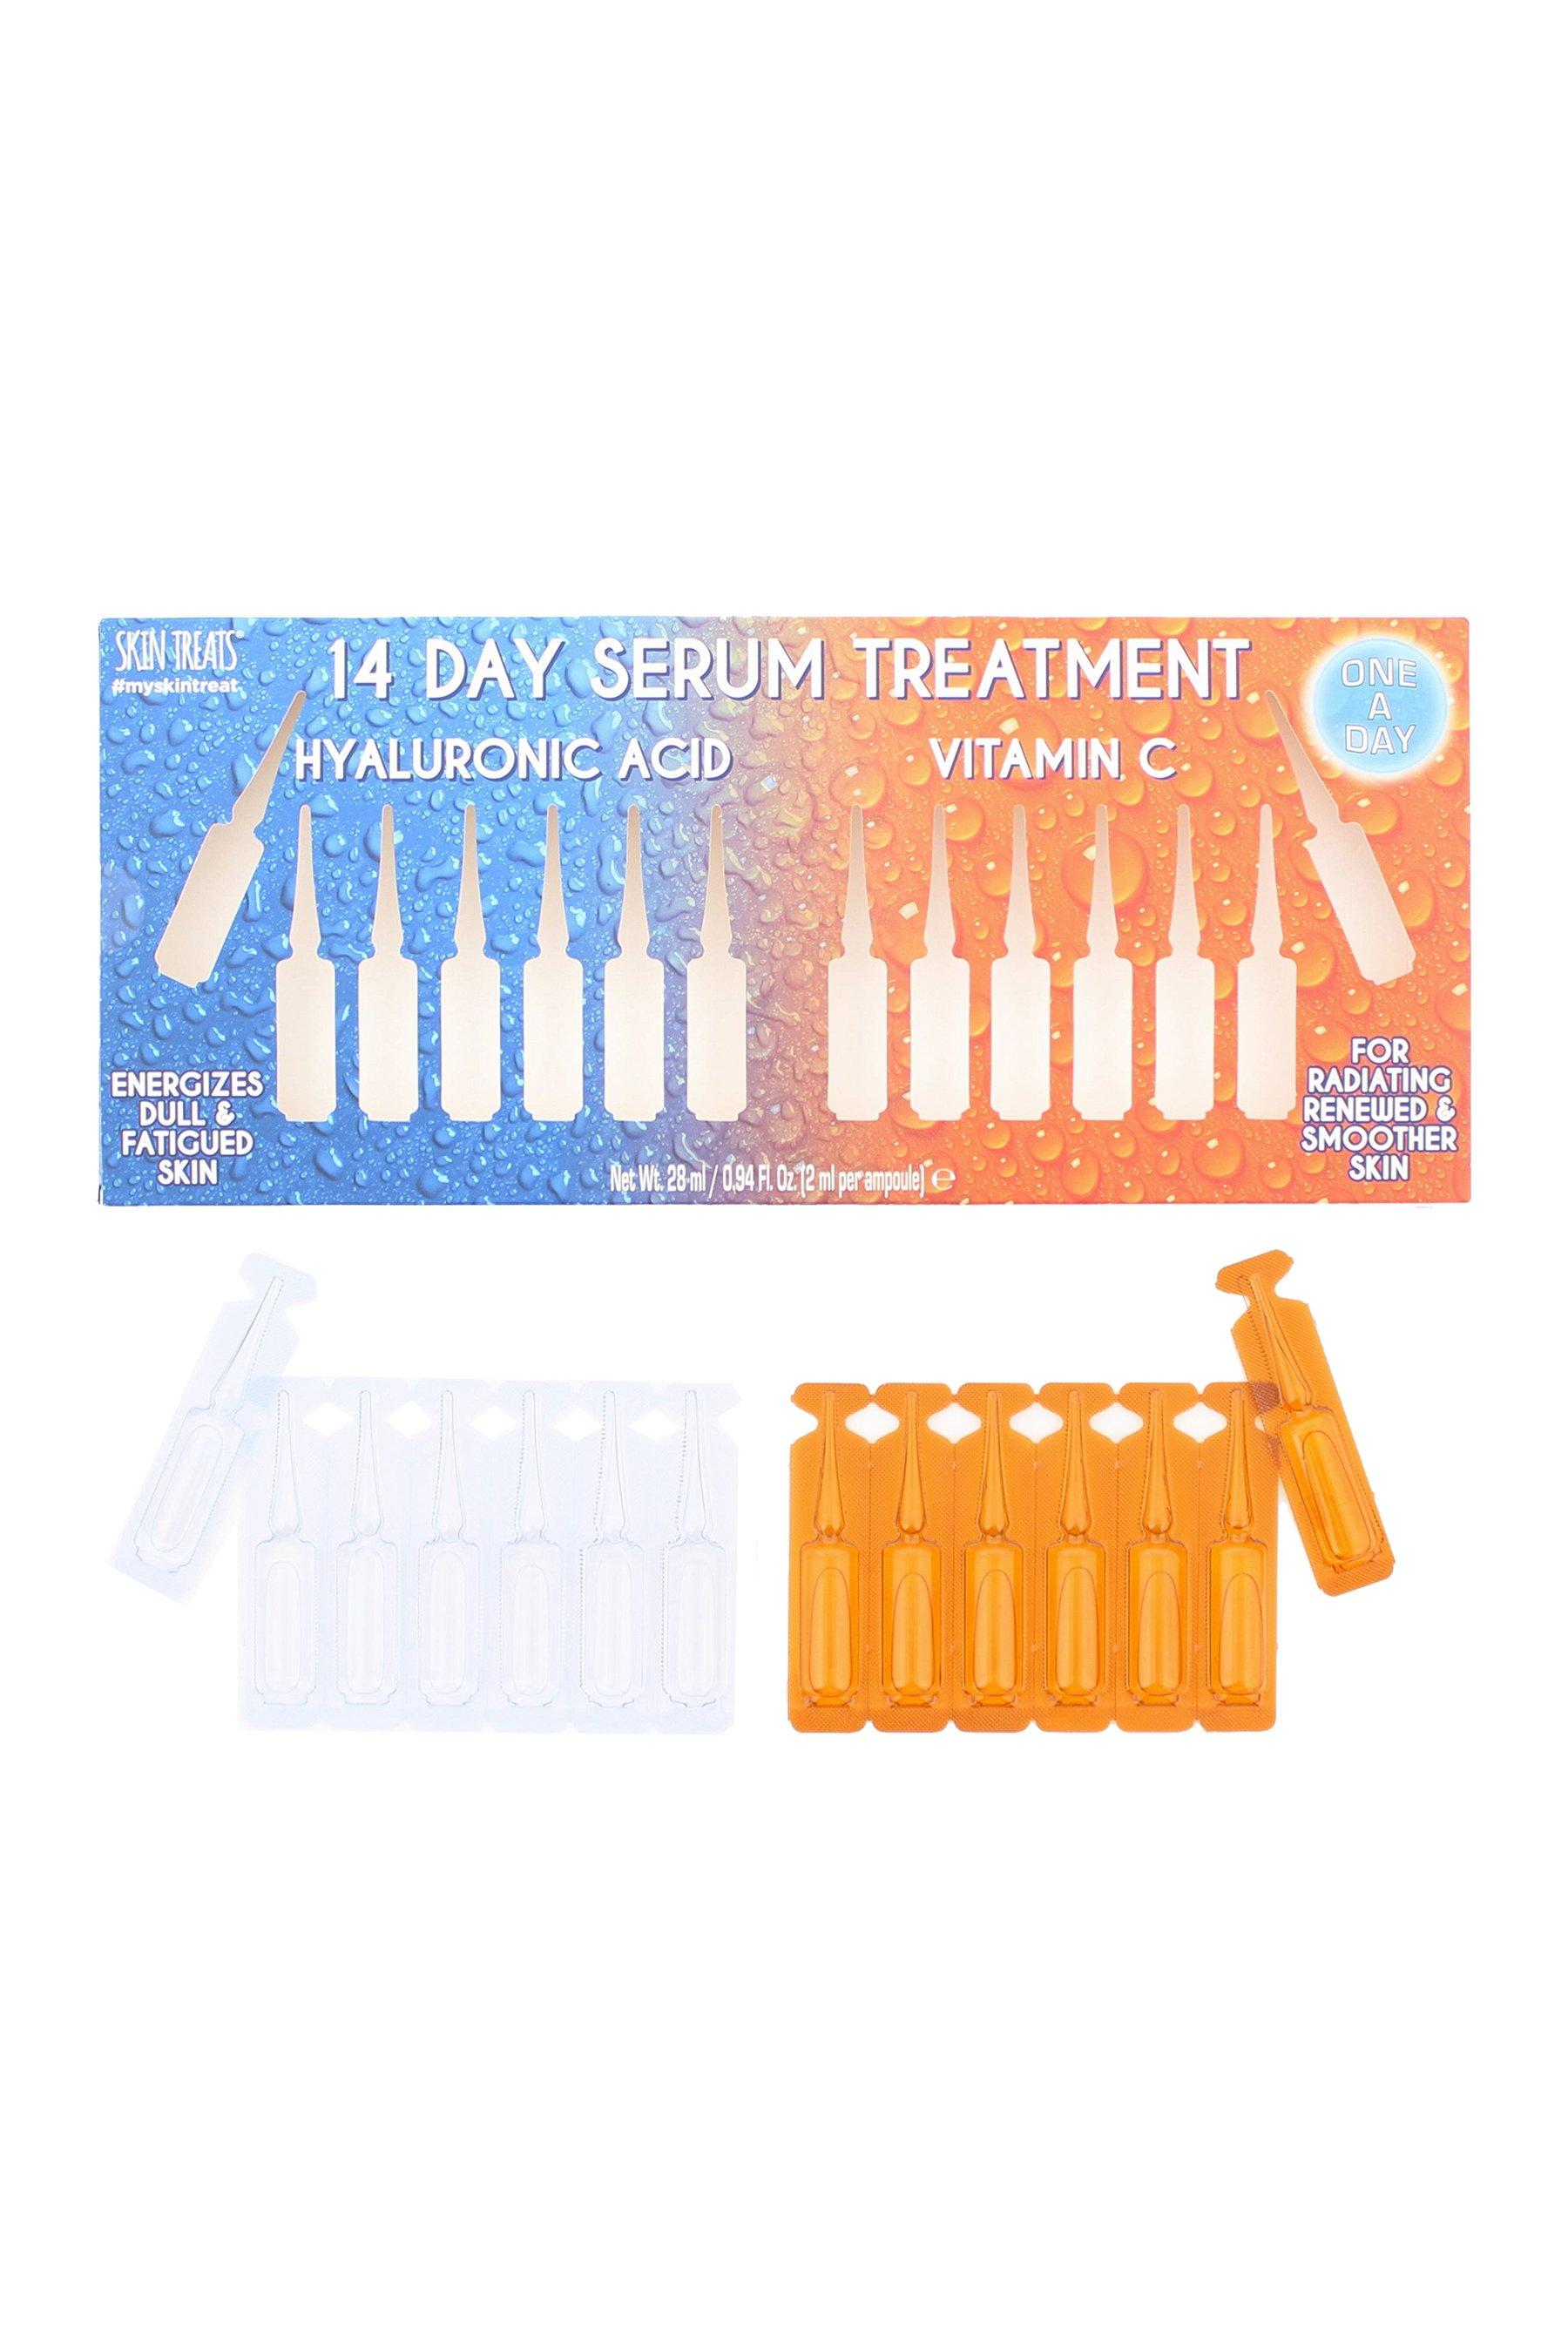 skin treats hyaluronic acid and vitamin c ampoules set